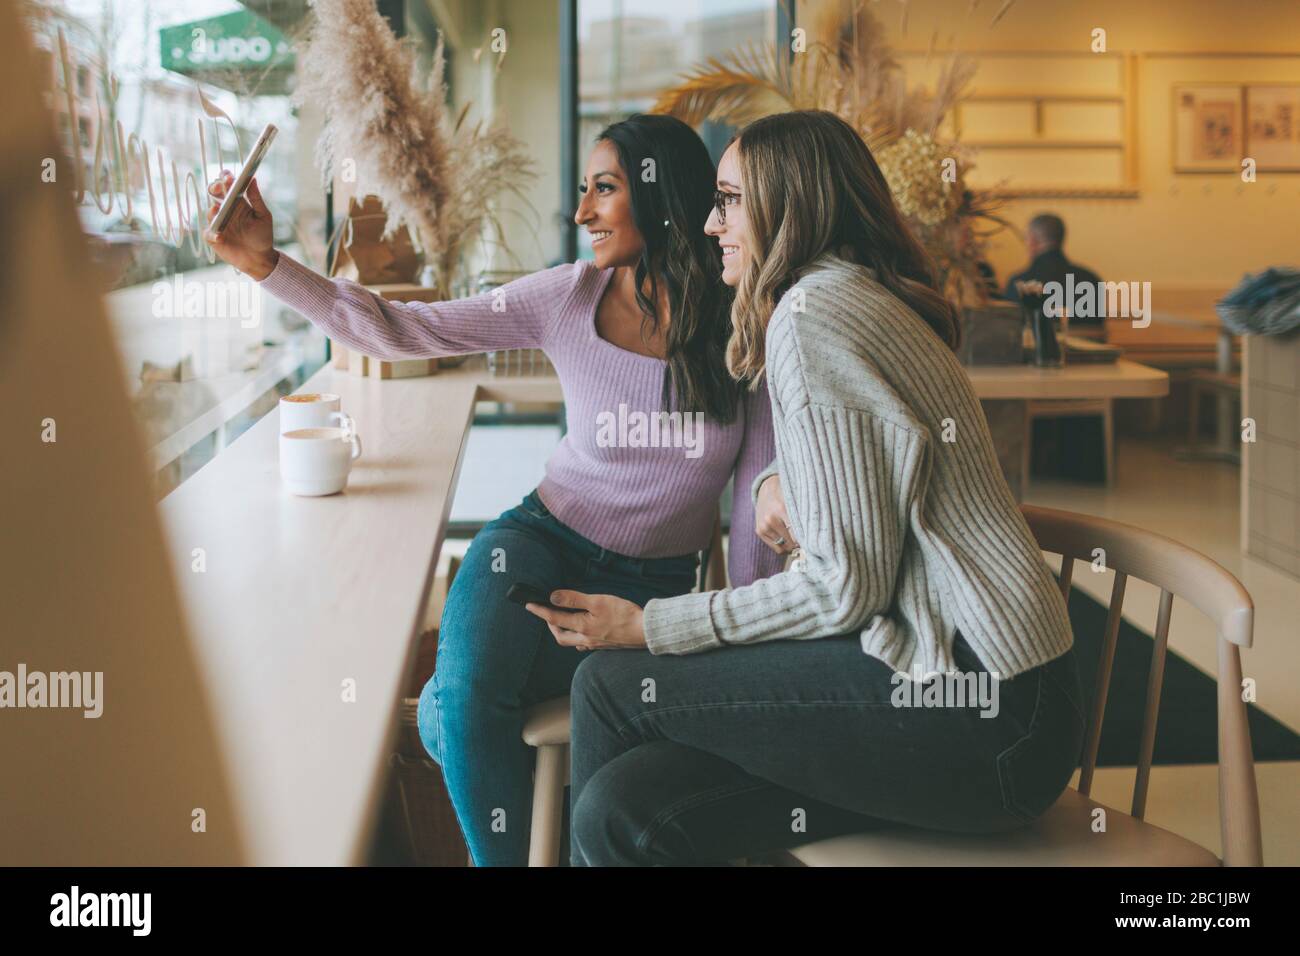 Two women taking a selfie in a cafe Stock Photo